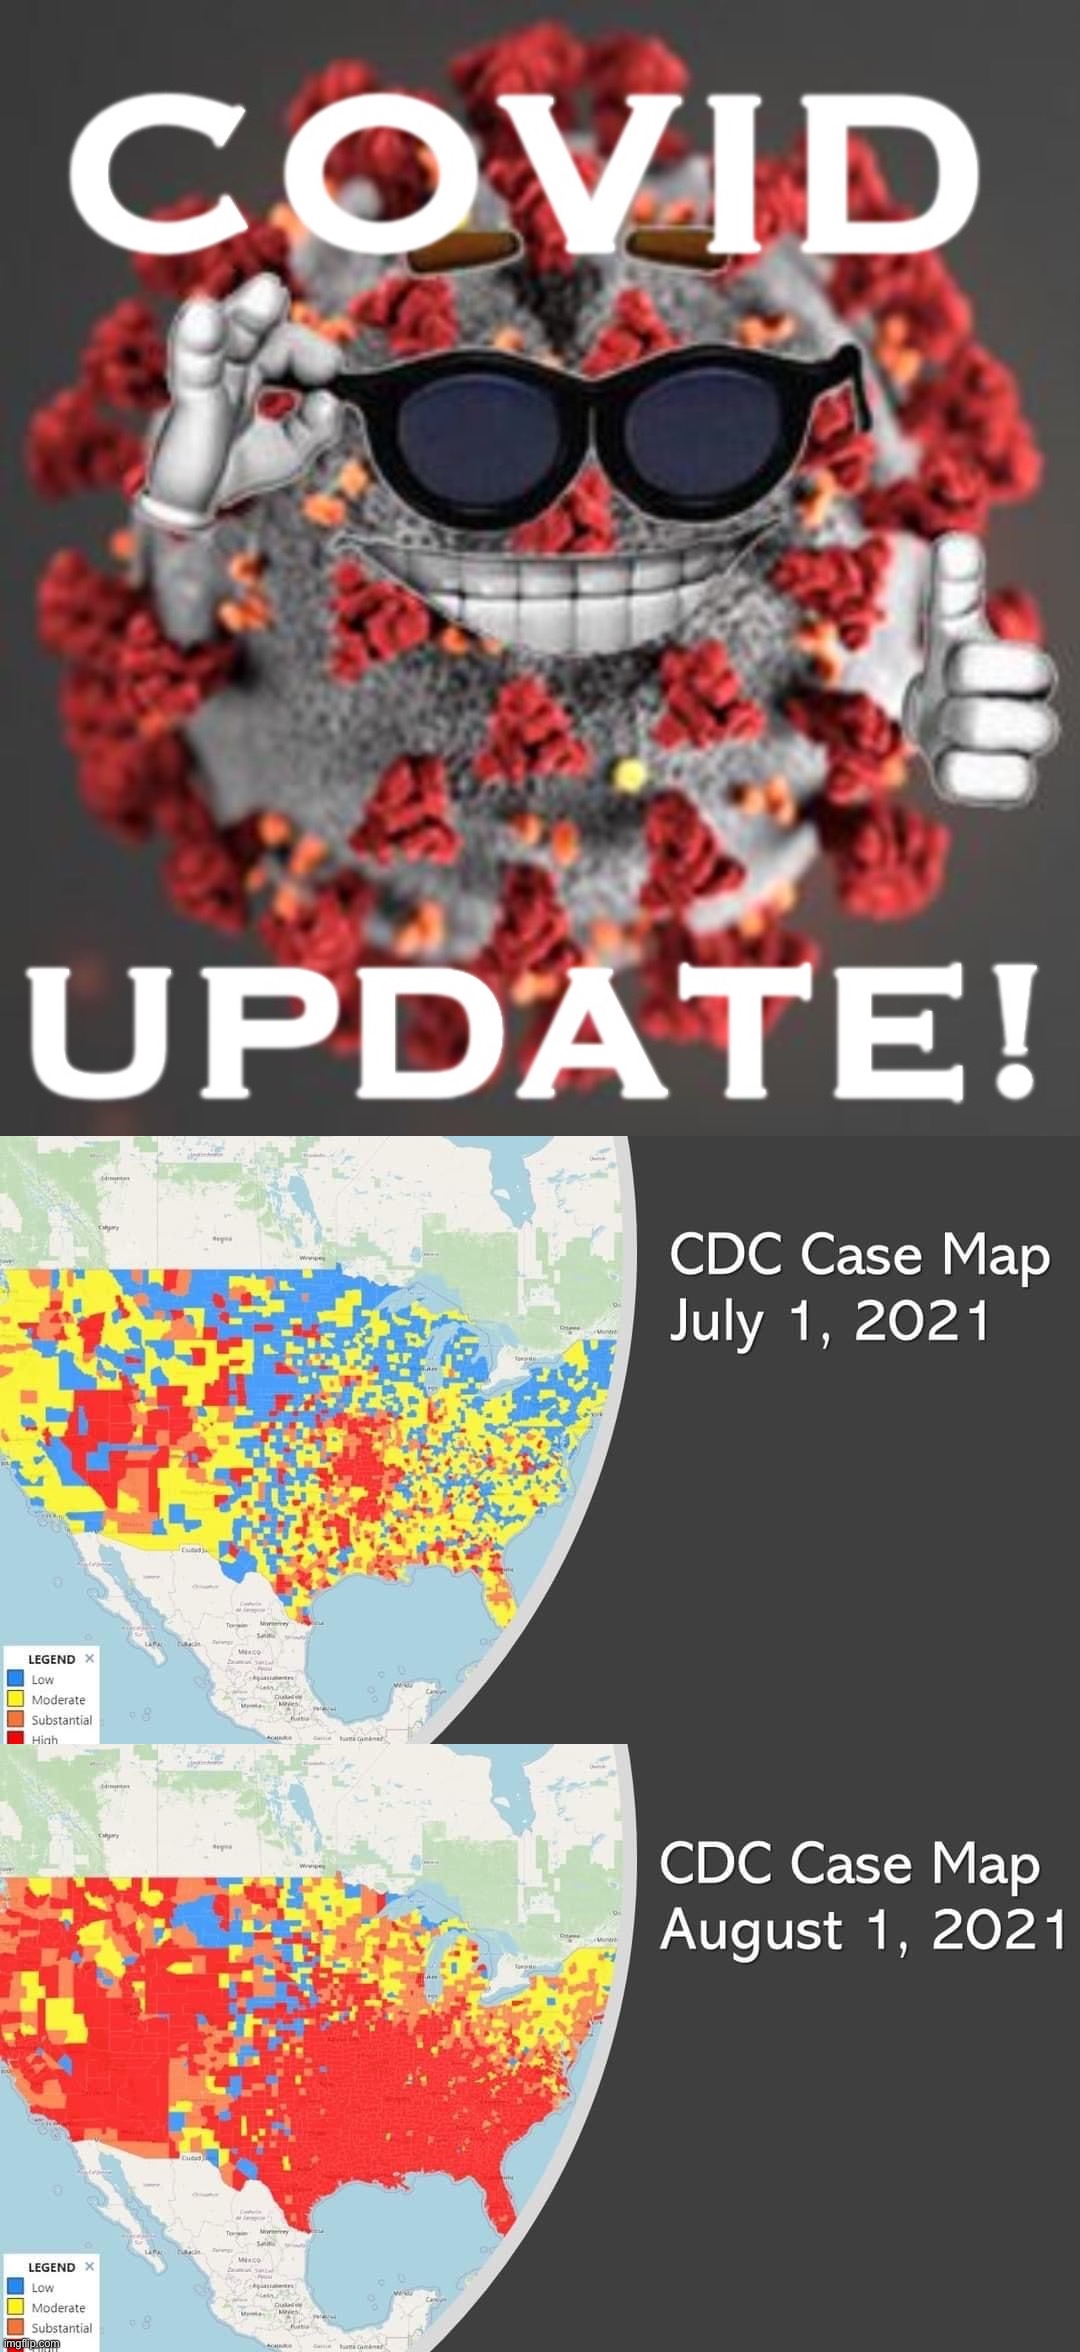 Things that make you go hmmm | image tagged in covid update,covid-19 cdc case map july 2021,covid-19 cdc case map august 2021,cdc,covid-19,coronavirus | made w/ Imgflip meme maker